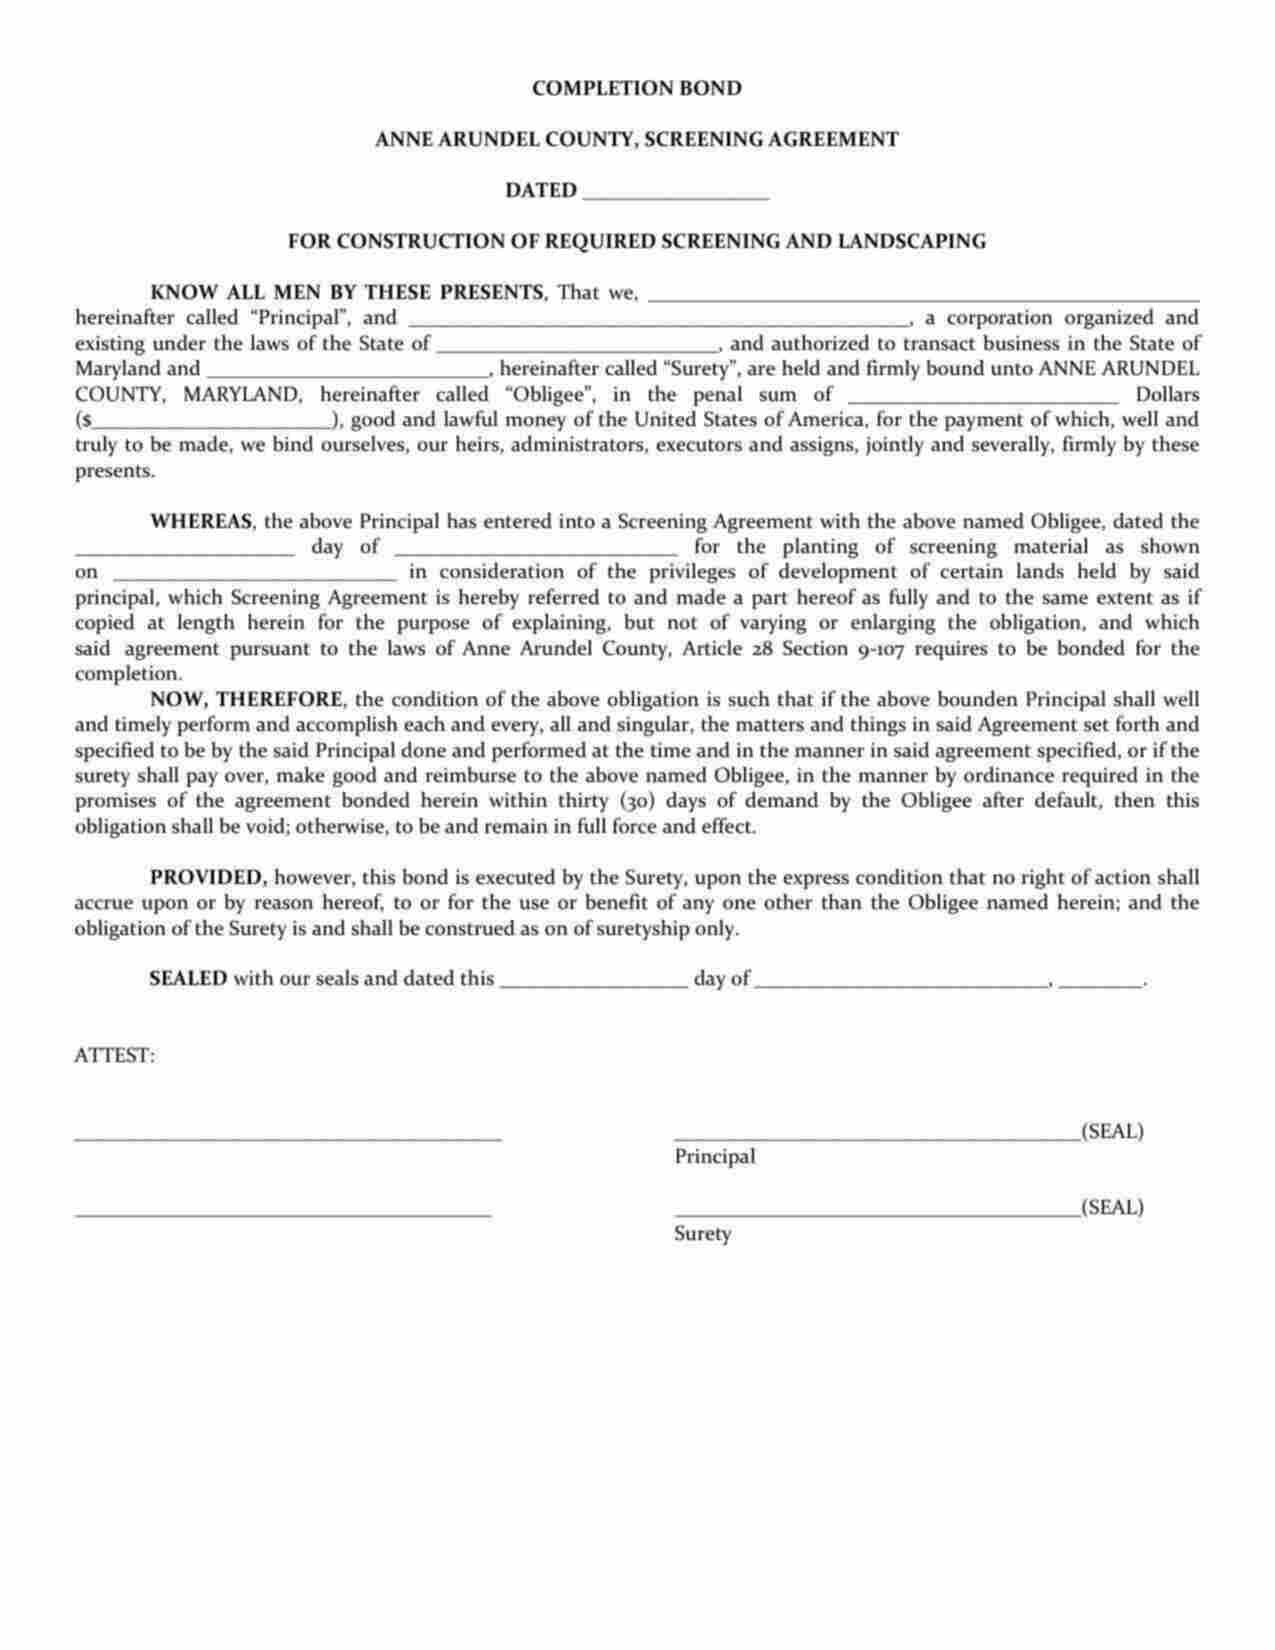 Maryland Construction of Required Screening and Landscaping Bond Form